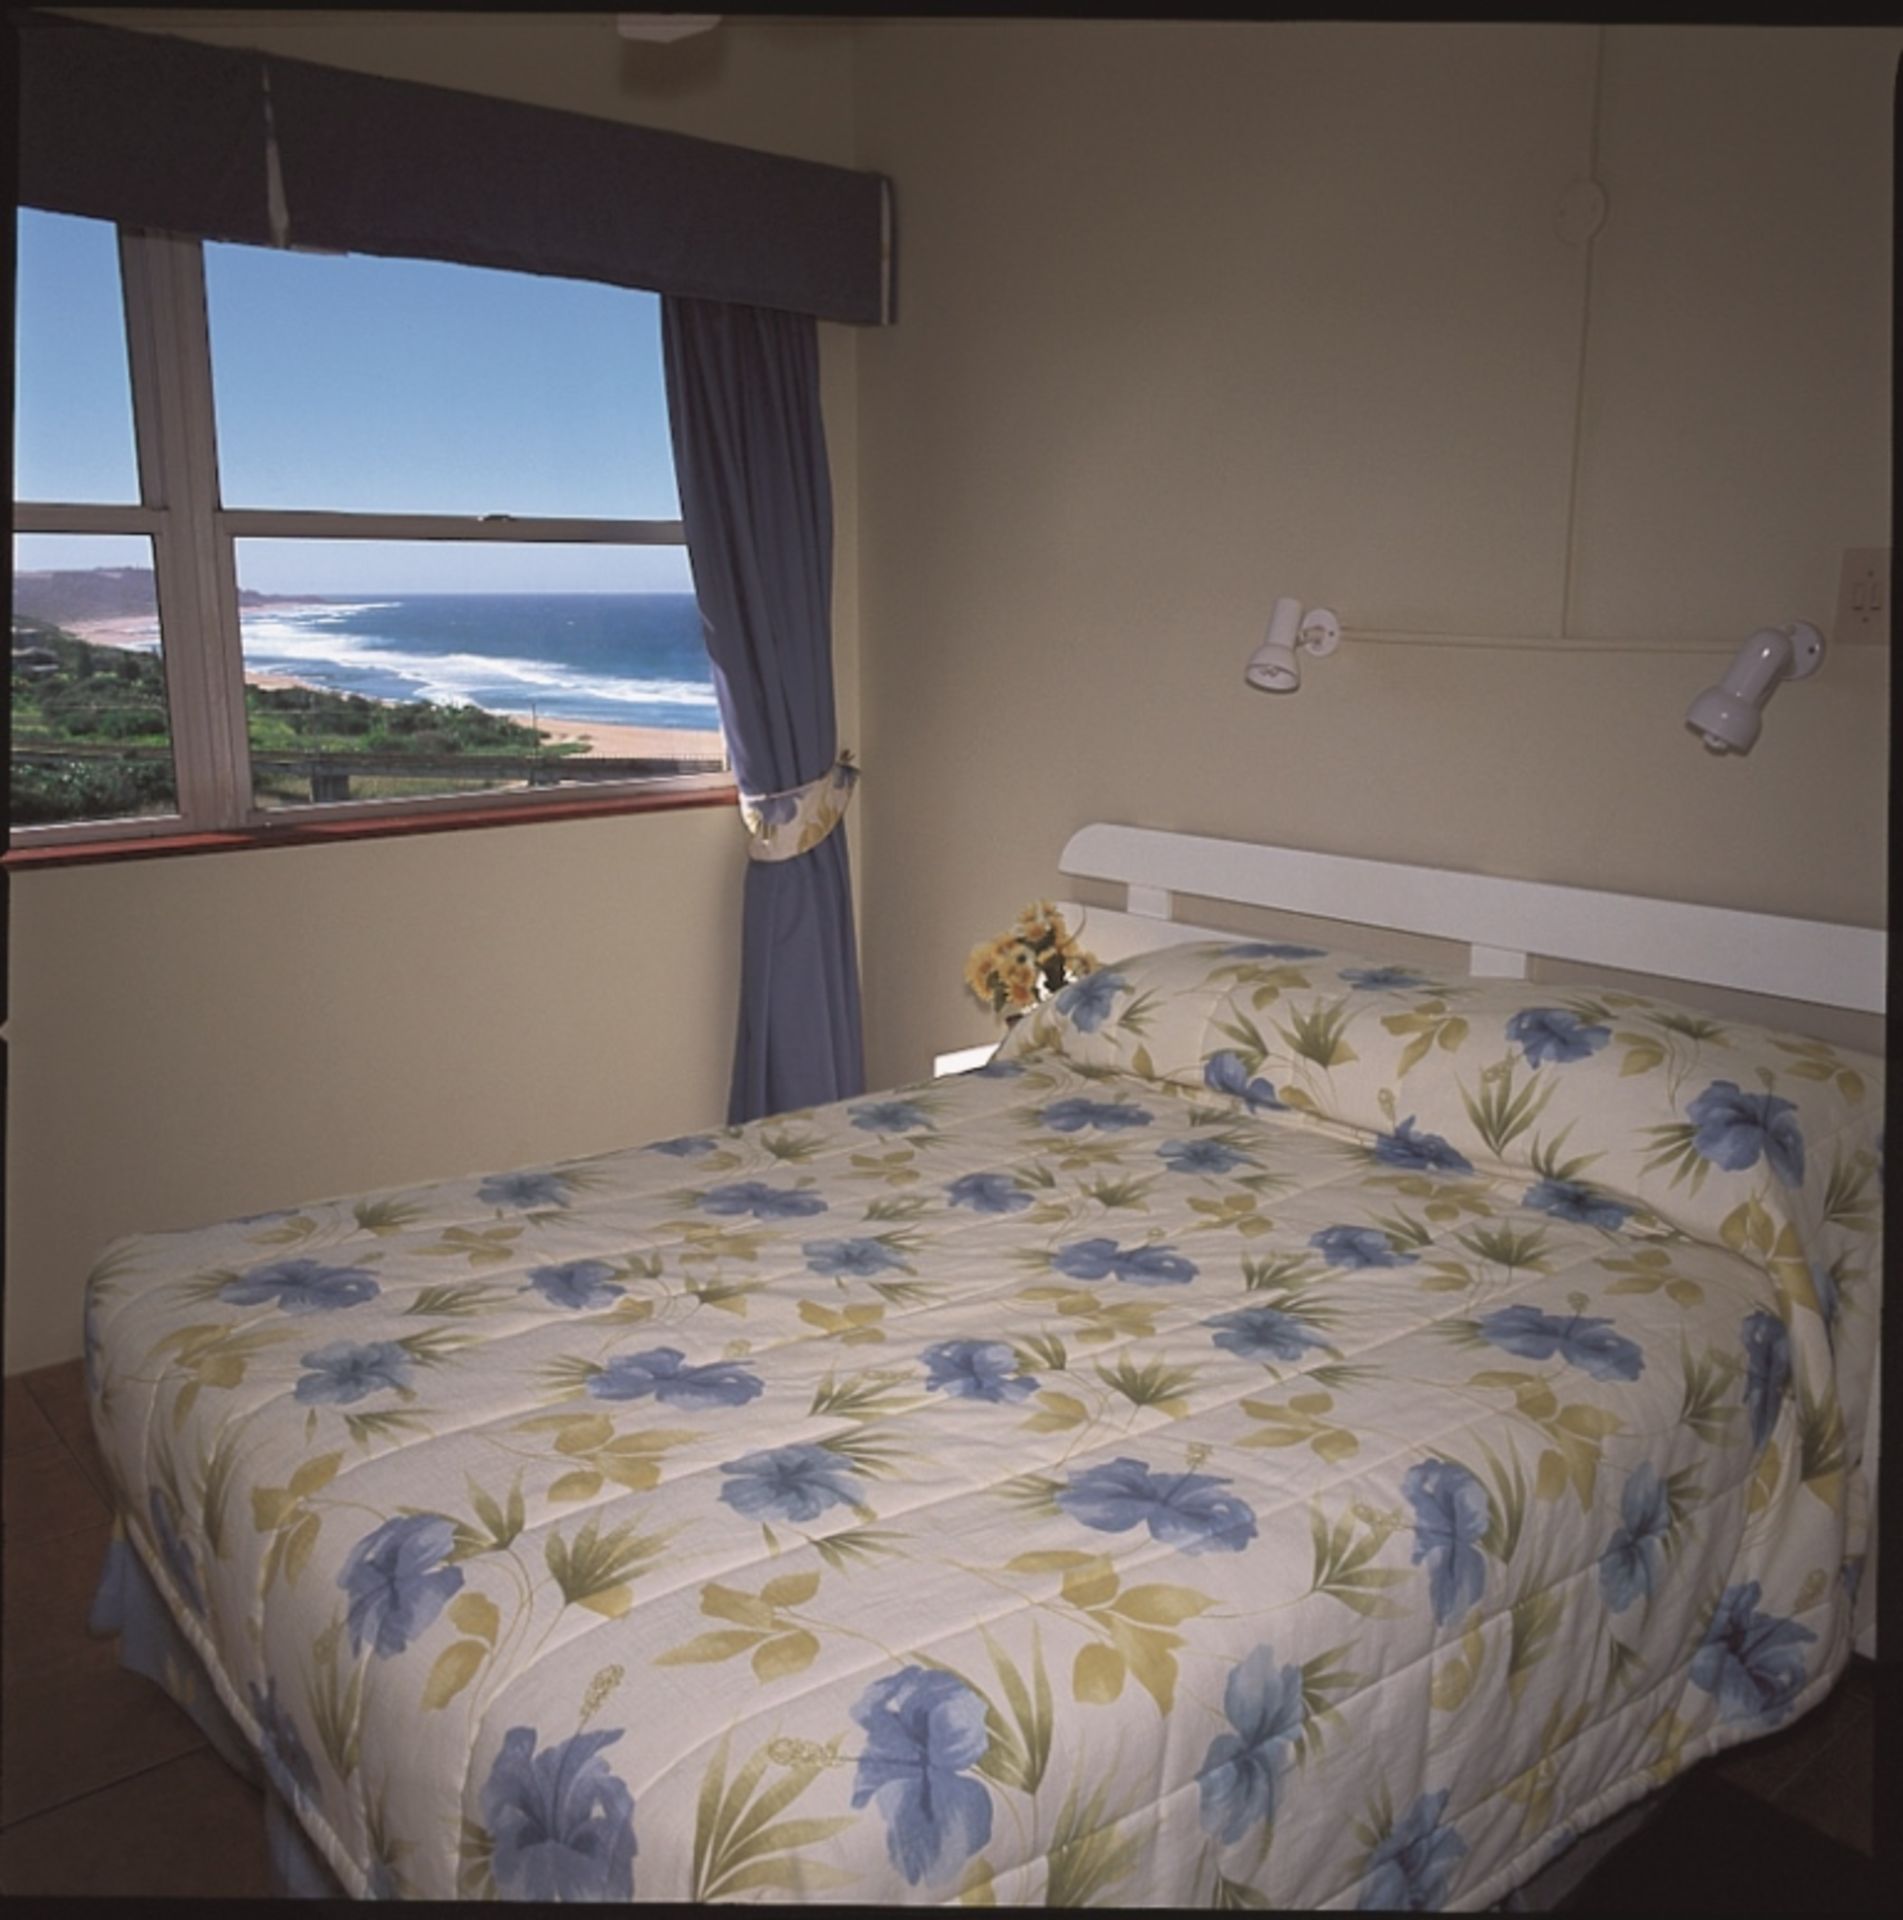 Pearly Shells - 3 Beds (8 Sleepers Max)  . Date - 29/07/2016 - 05/08/2016 - (Shareblock) - Image 26 of 32